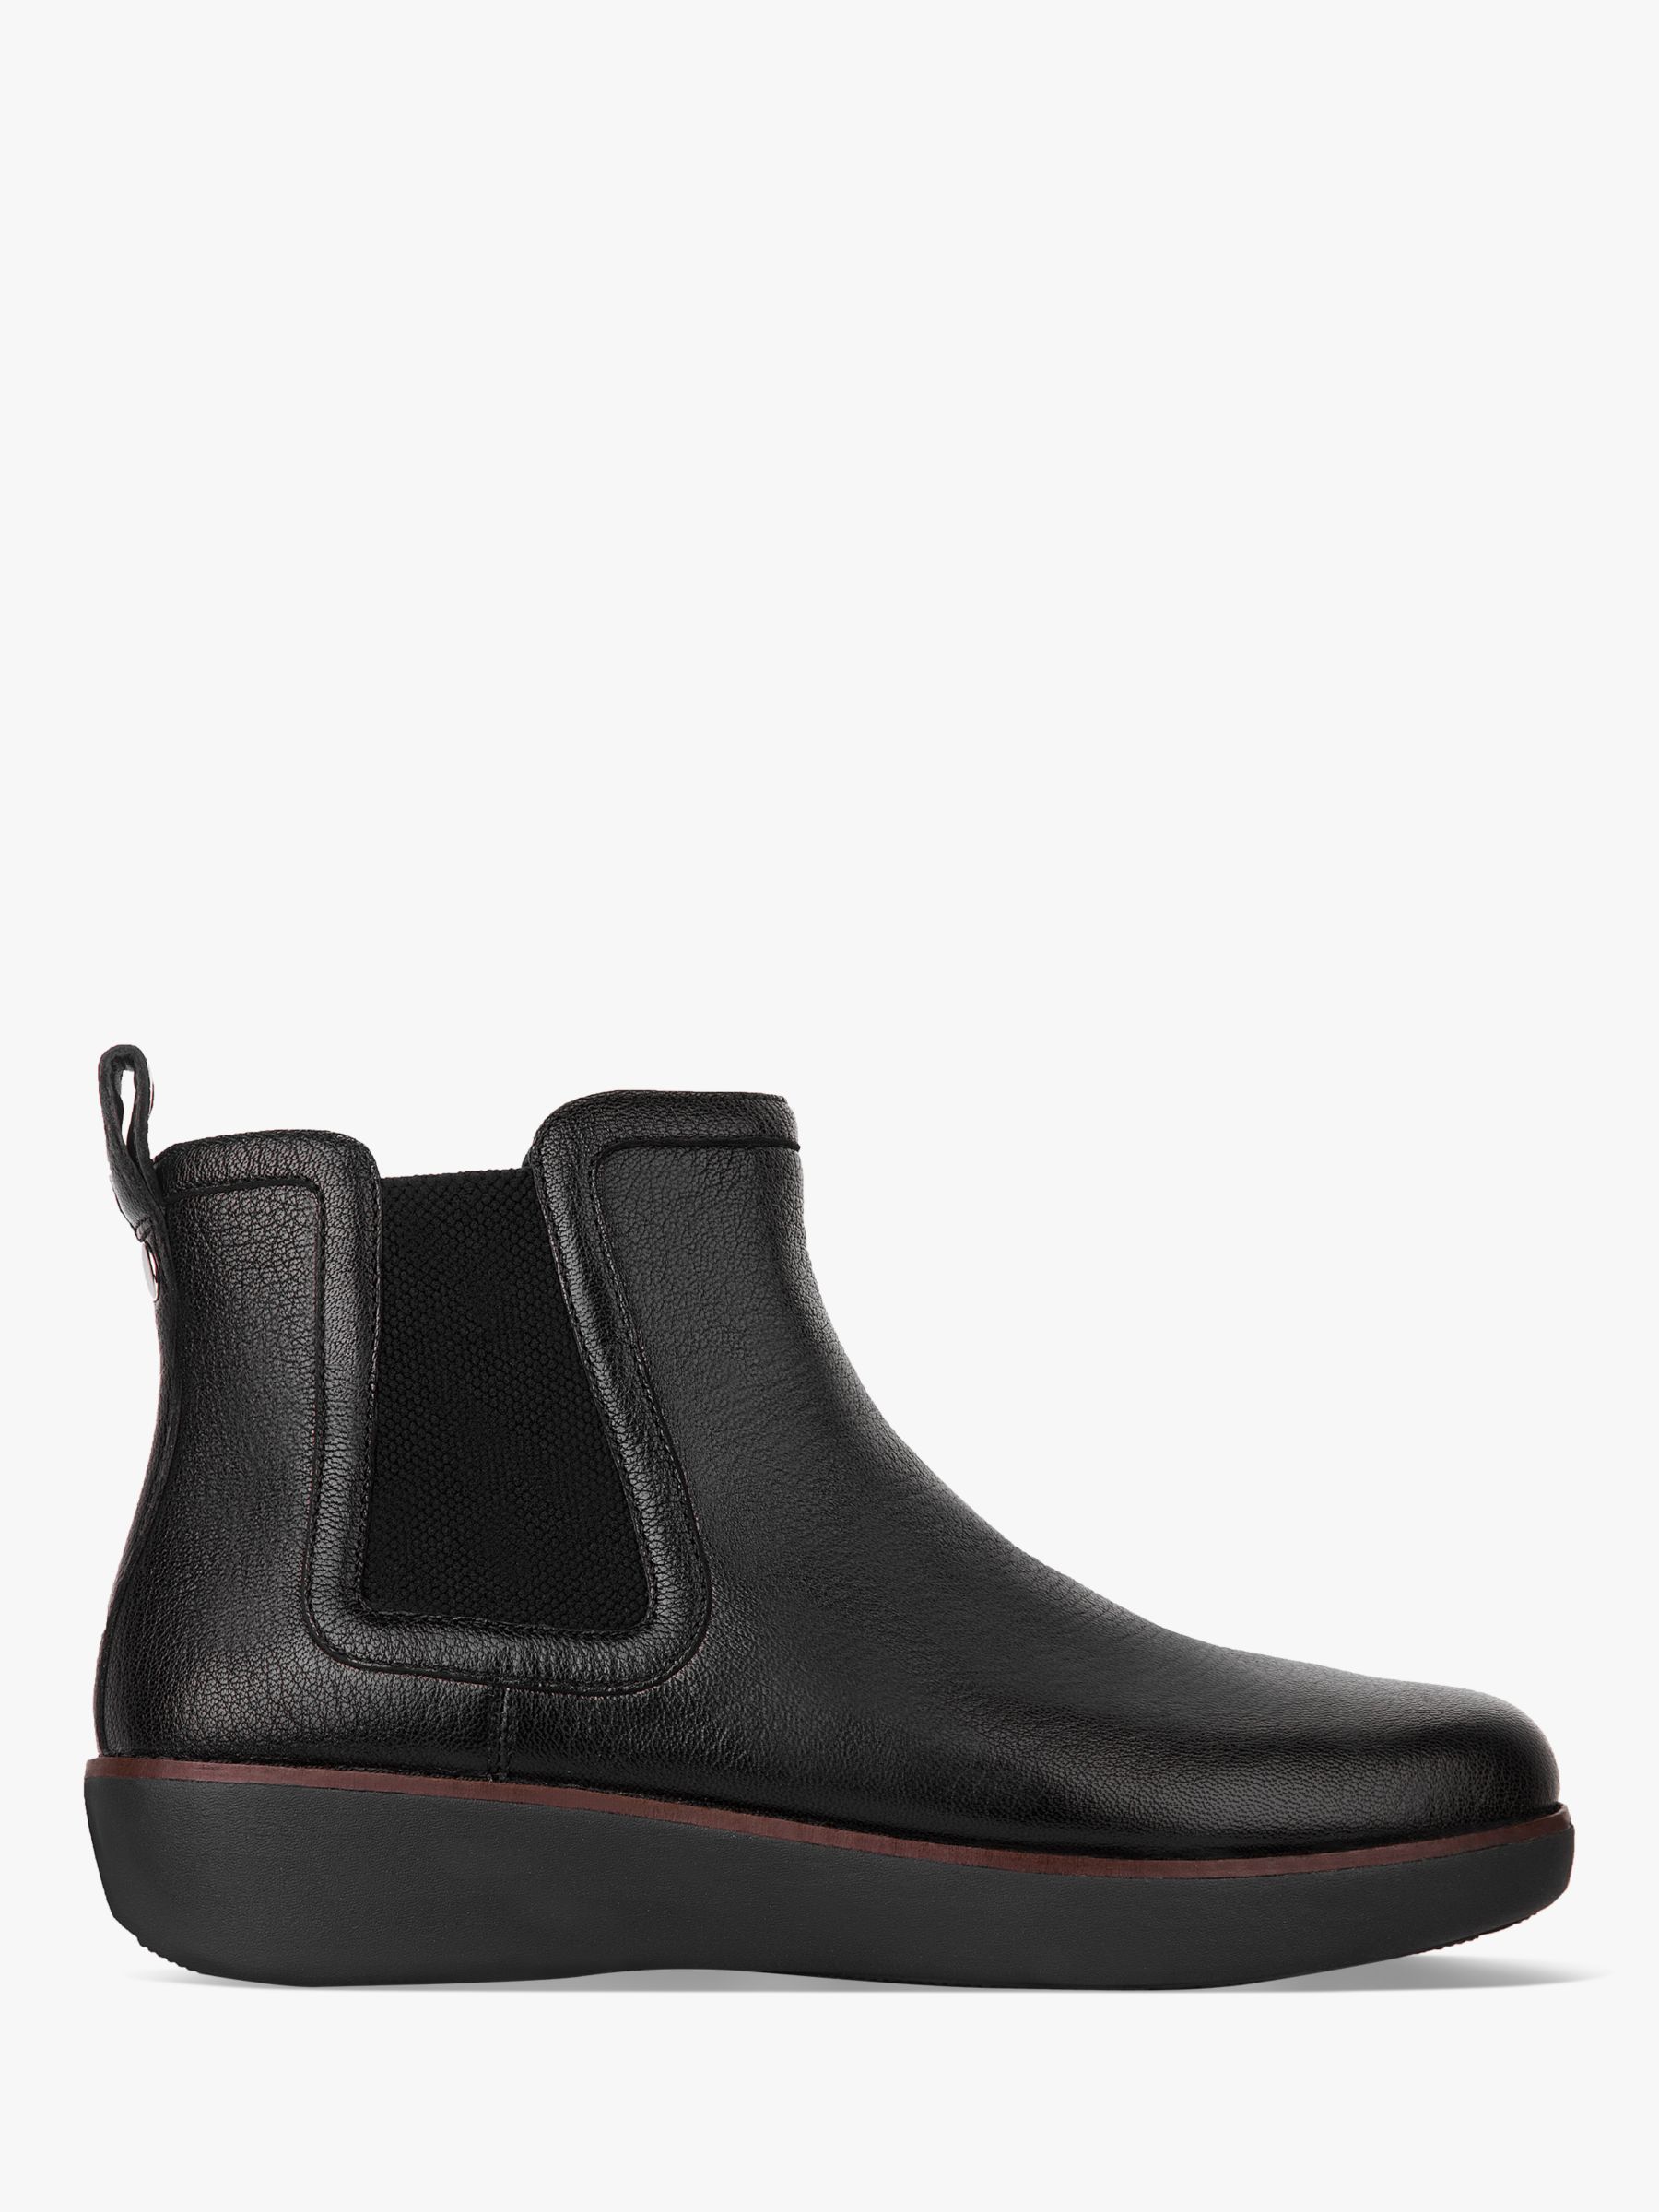 fitflop chelsea boots uk